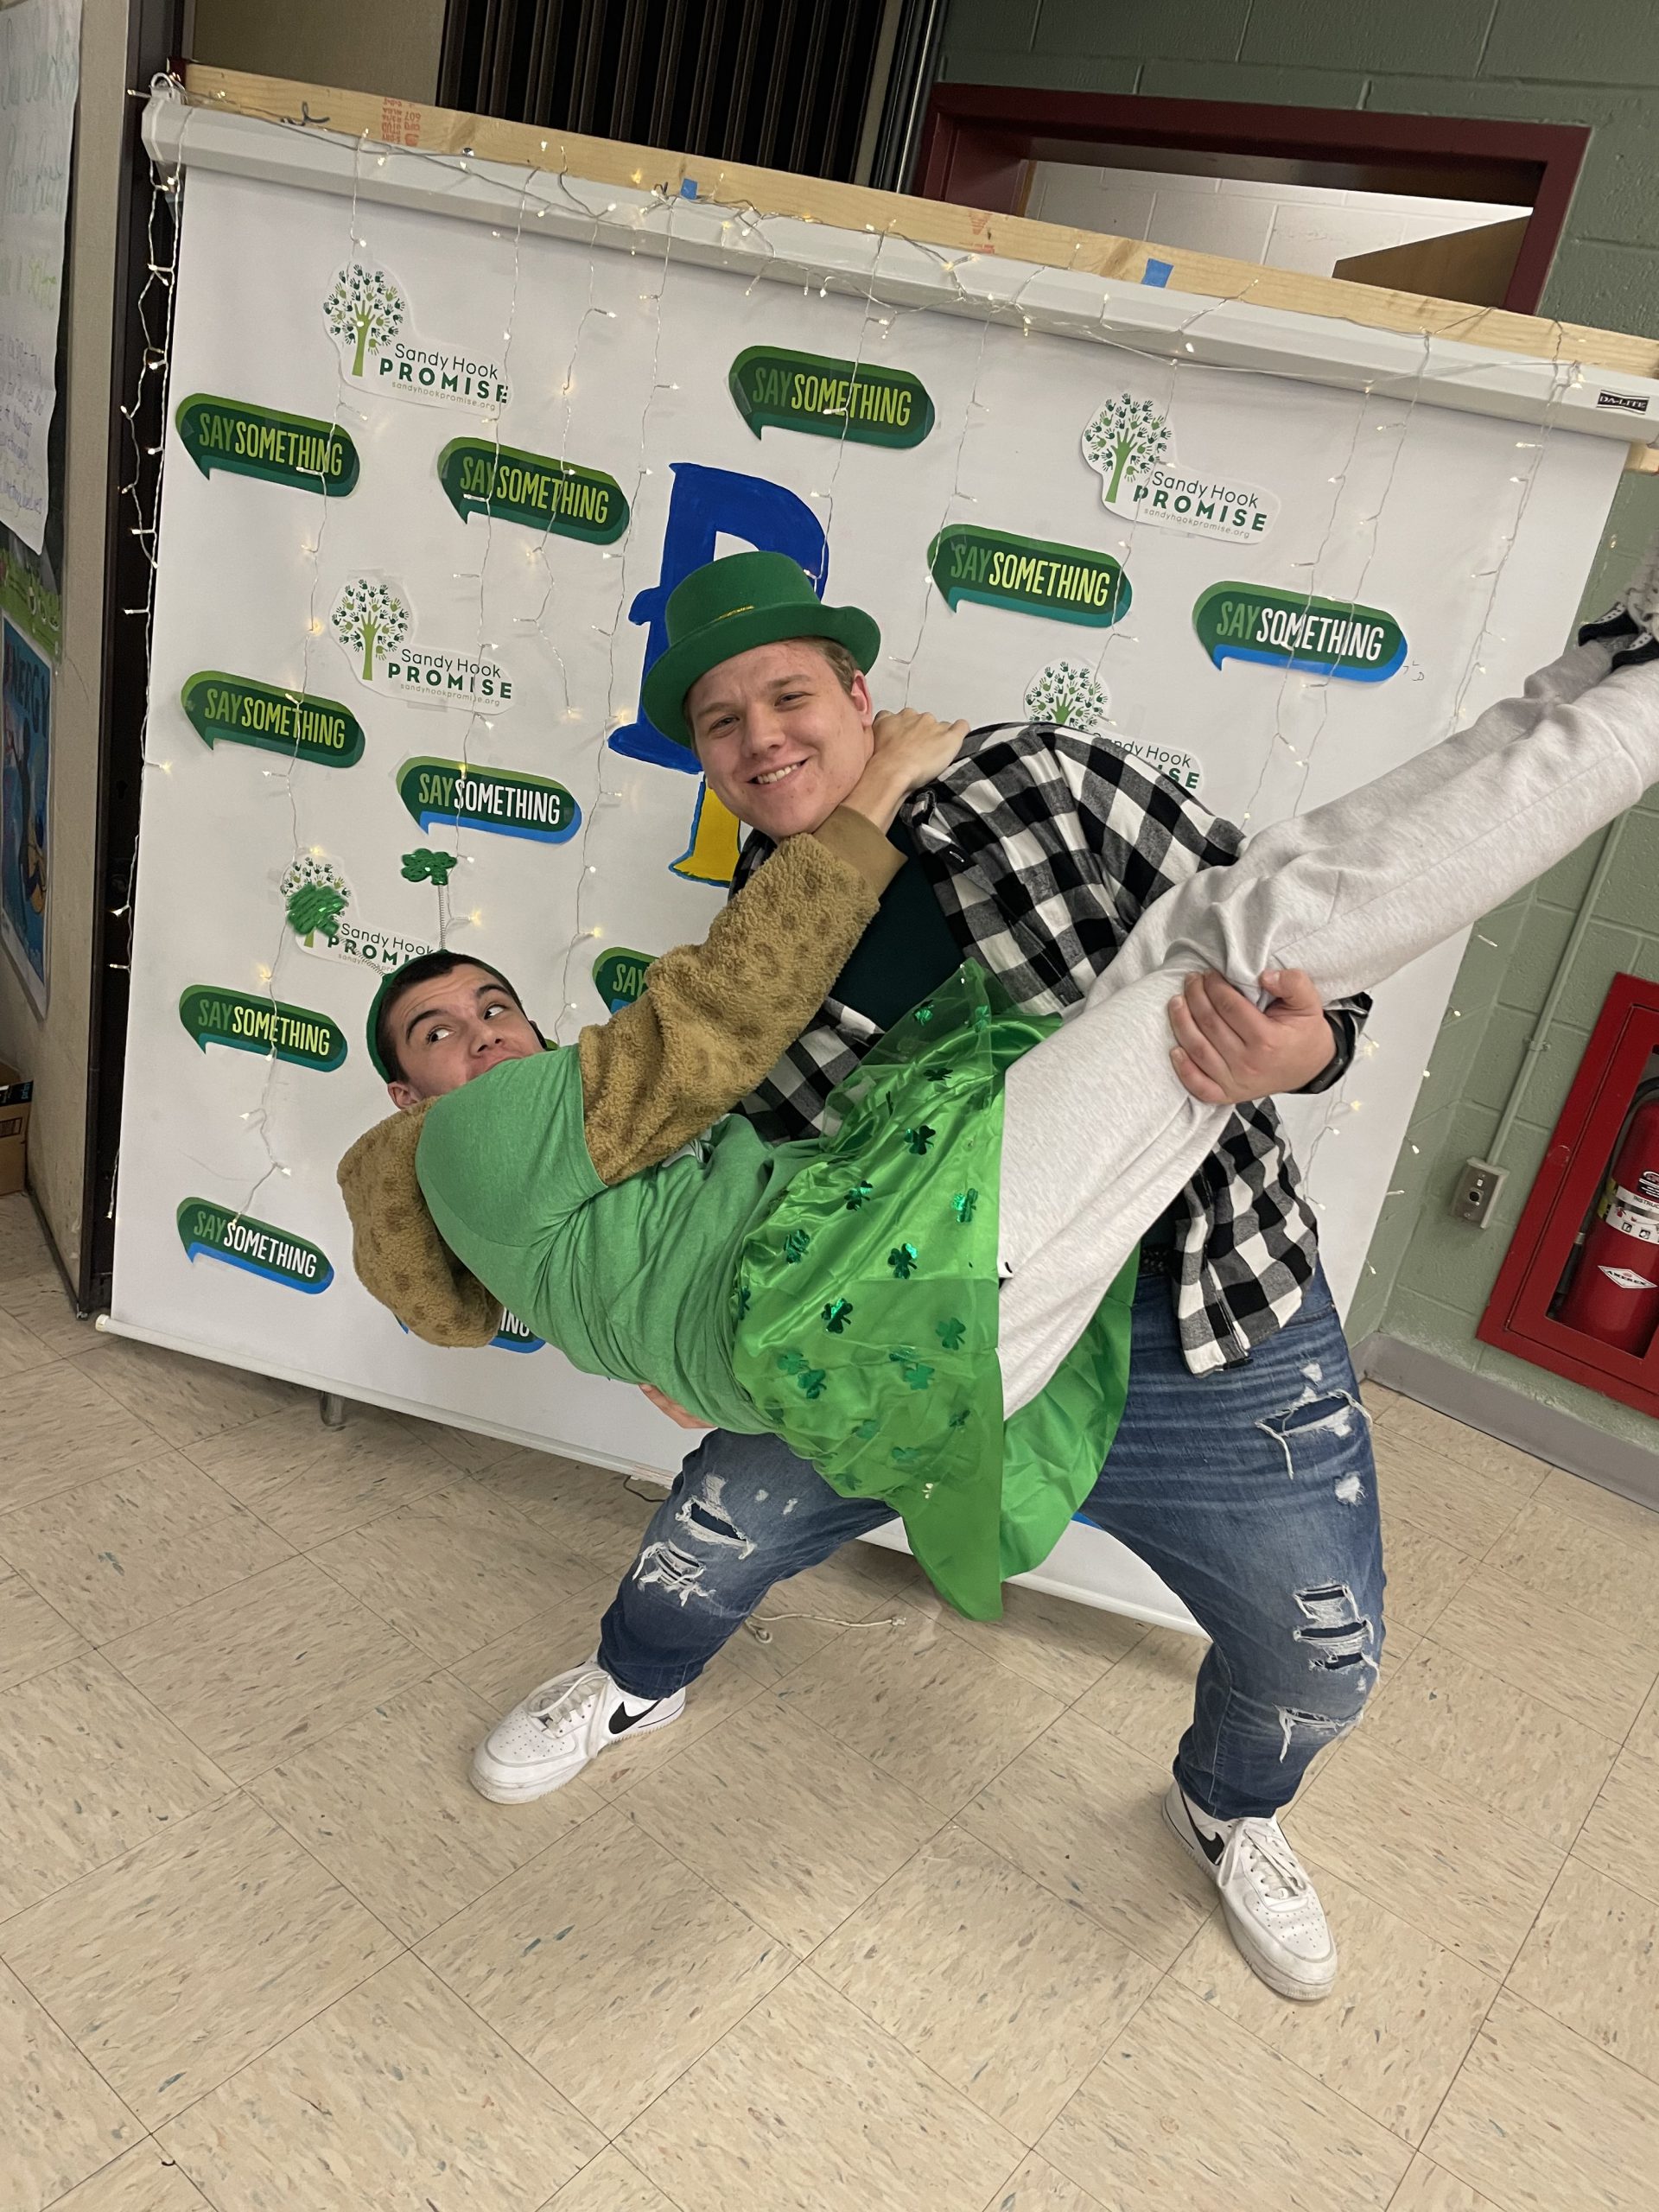 Two high school students clown around in front of a banner with Say Something all over it. The one boy, wearing a green hat and a black and white checked shirt smiles as he holds another high school boy , wearing white pants and a green shirt and tutu.